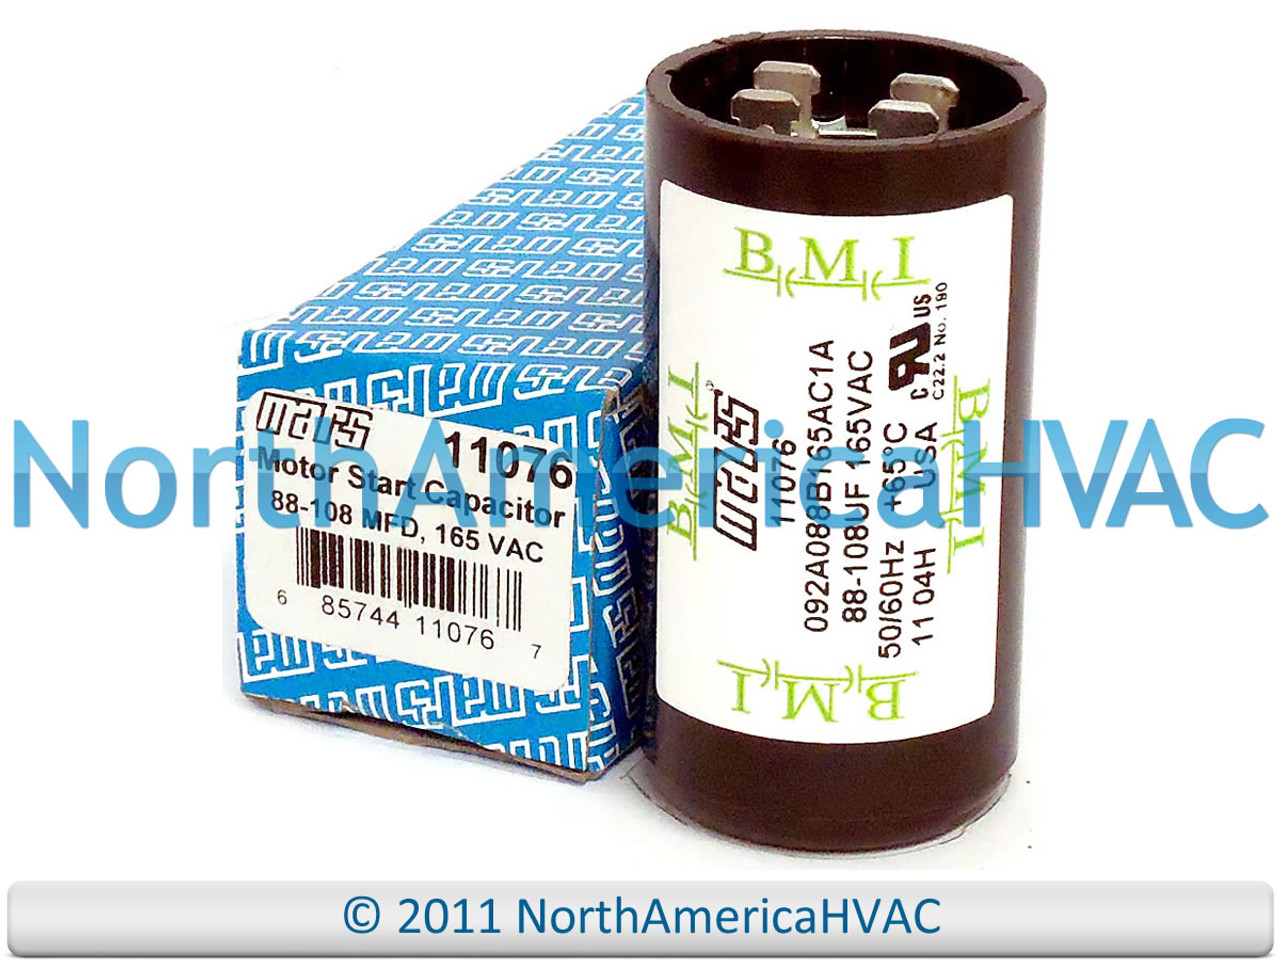 Motor Start Capacitor 88-108 MFD 165 VAC Fits York Coleman Luxaire 